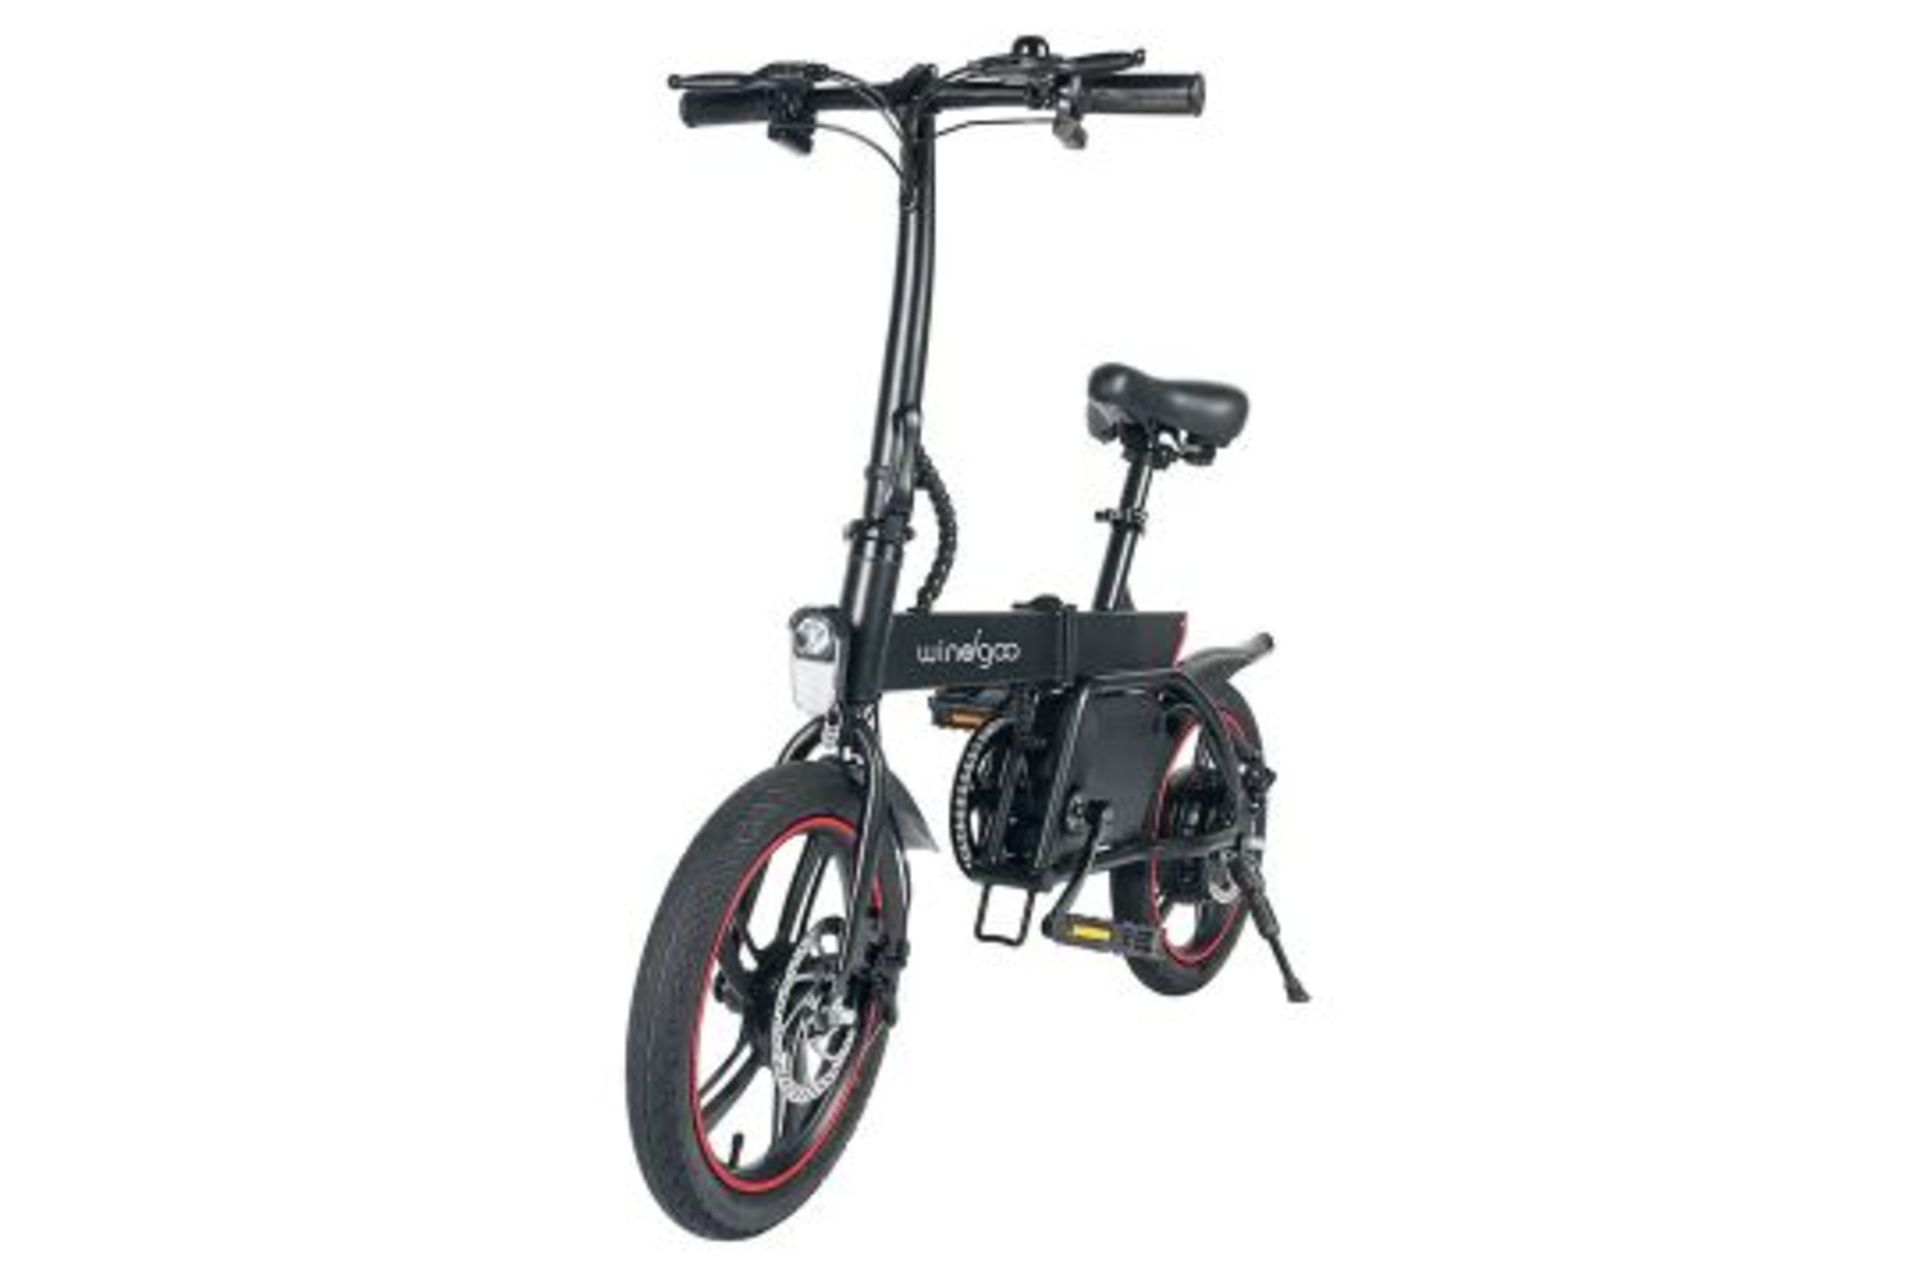 BRAND NEW Windgoo B20 Pro Electric Bike. RRP £1,100.99. With 16-inch-wide tires and a frame of - Image 3 of 3